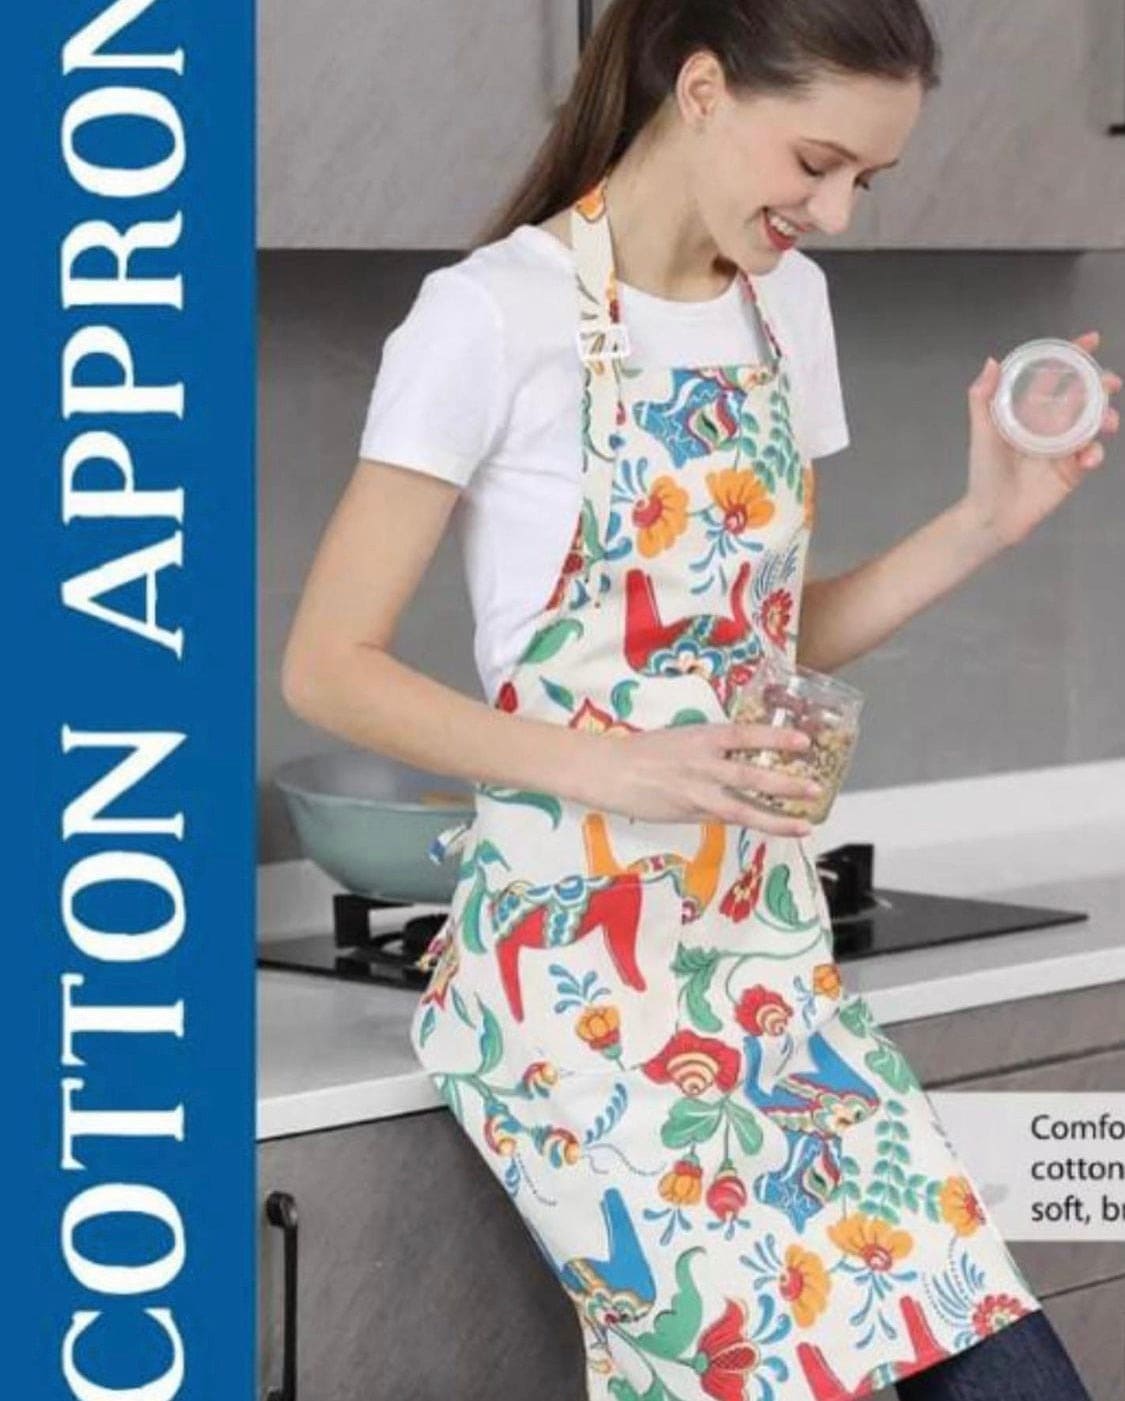 Cotton Kitchen Aprons, Baking Restaurants Work Clothes With Pockets, Sleeveless Bibs Fabric Fashion Couple Aprons